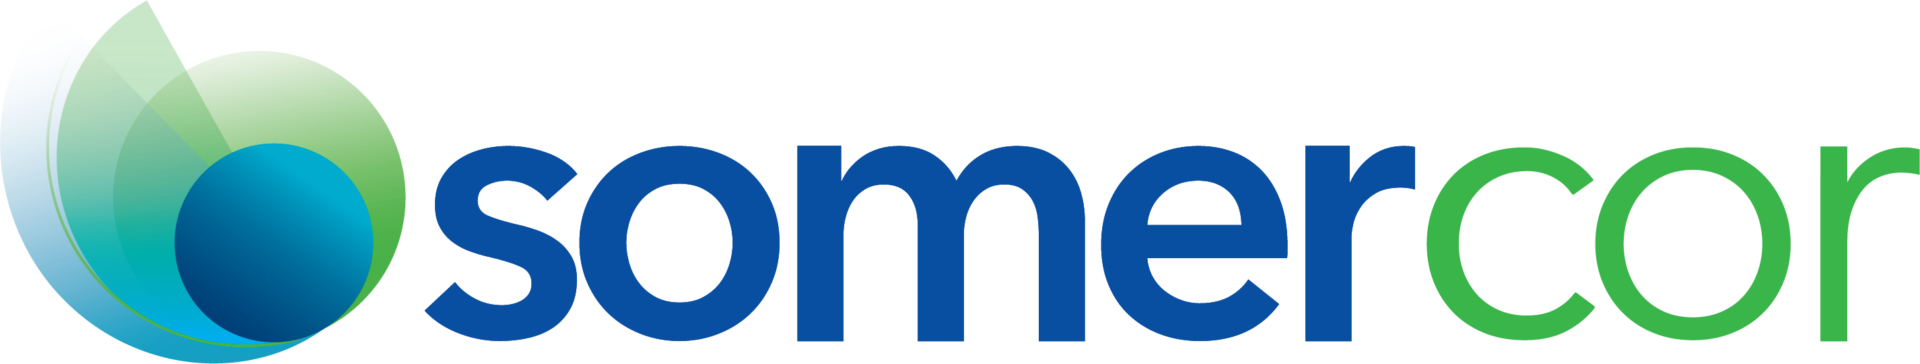 A green background with blue letters that say " vimeo ".